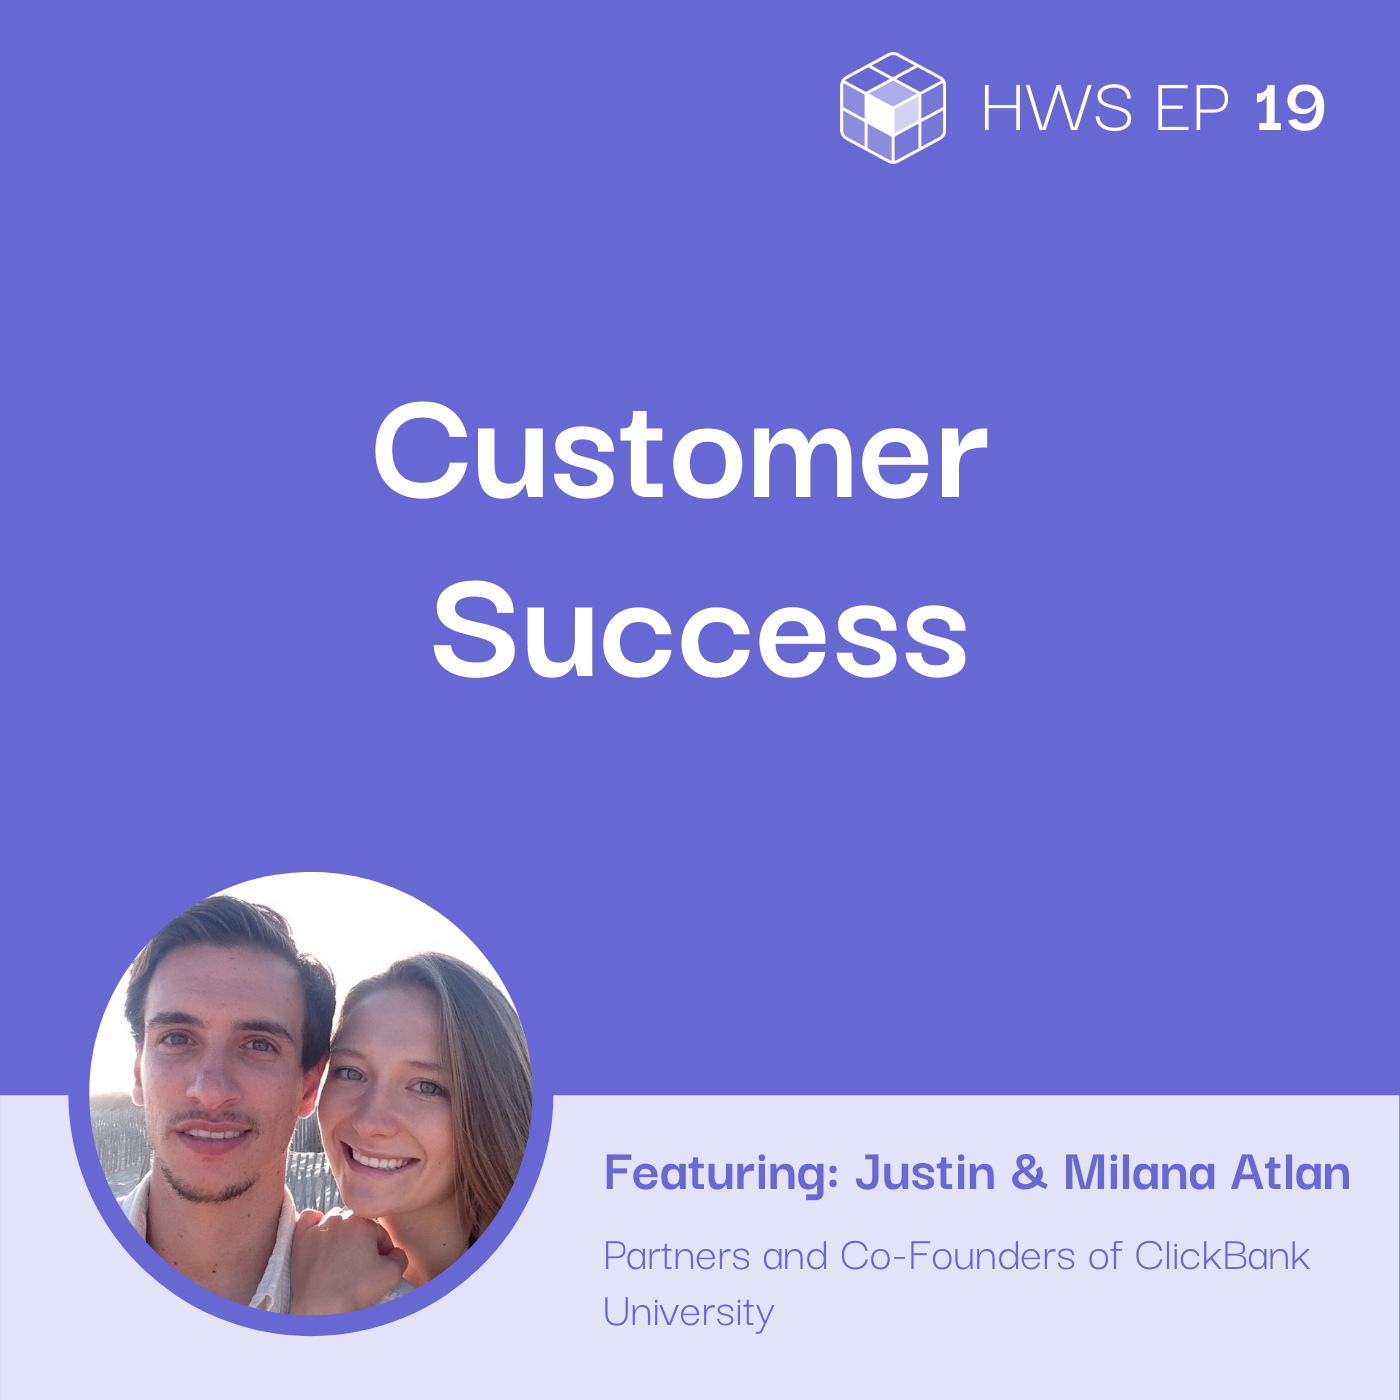 Justin and Milana Atlan share how to cater to different customers with just one product